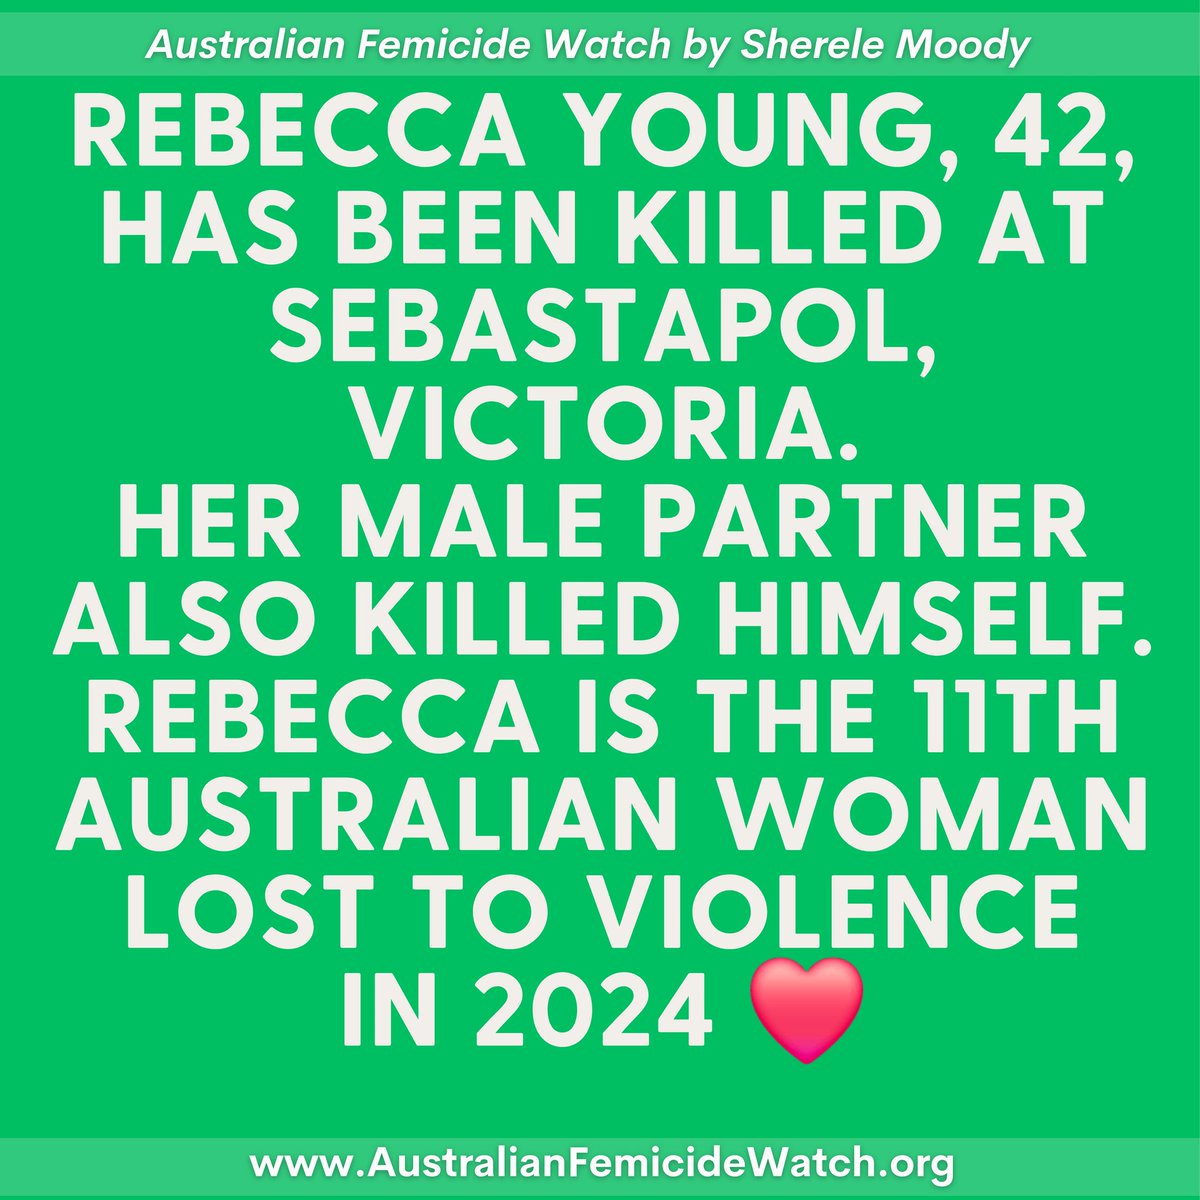 Rebecca Young was murdered last night in an apparent murder-suicide at Sebastapol, Victoria. Her killer was her partner. Rebecca is the 11th woman killed this year and the sixth murdered in just 17 days.